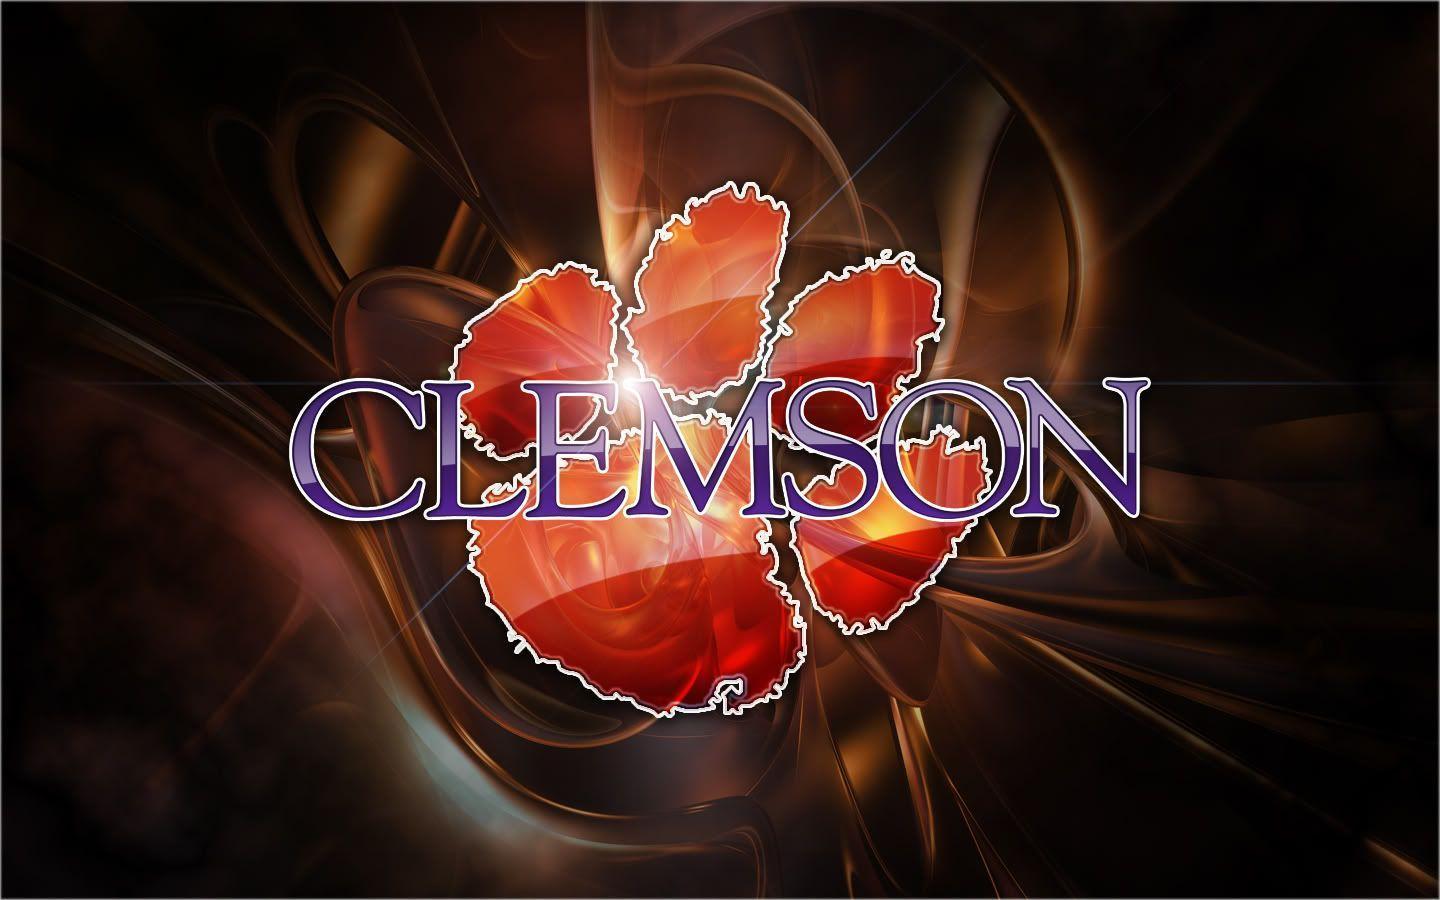 image about Clemson football